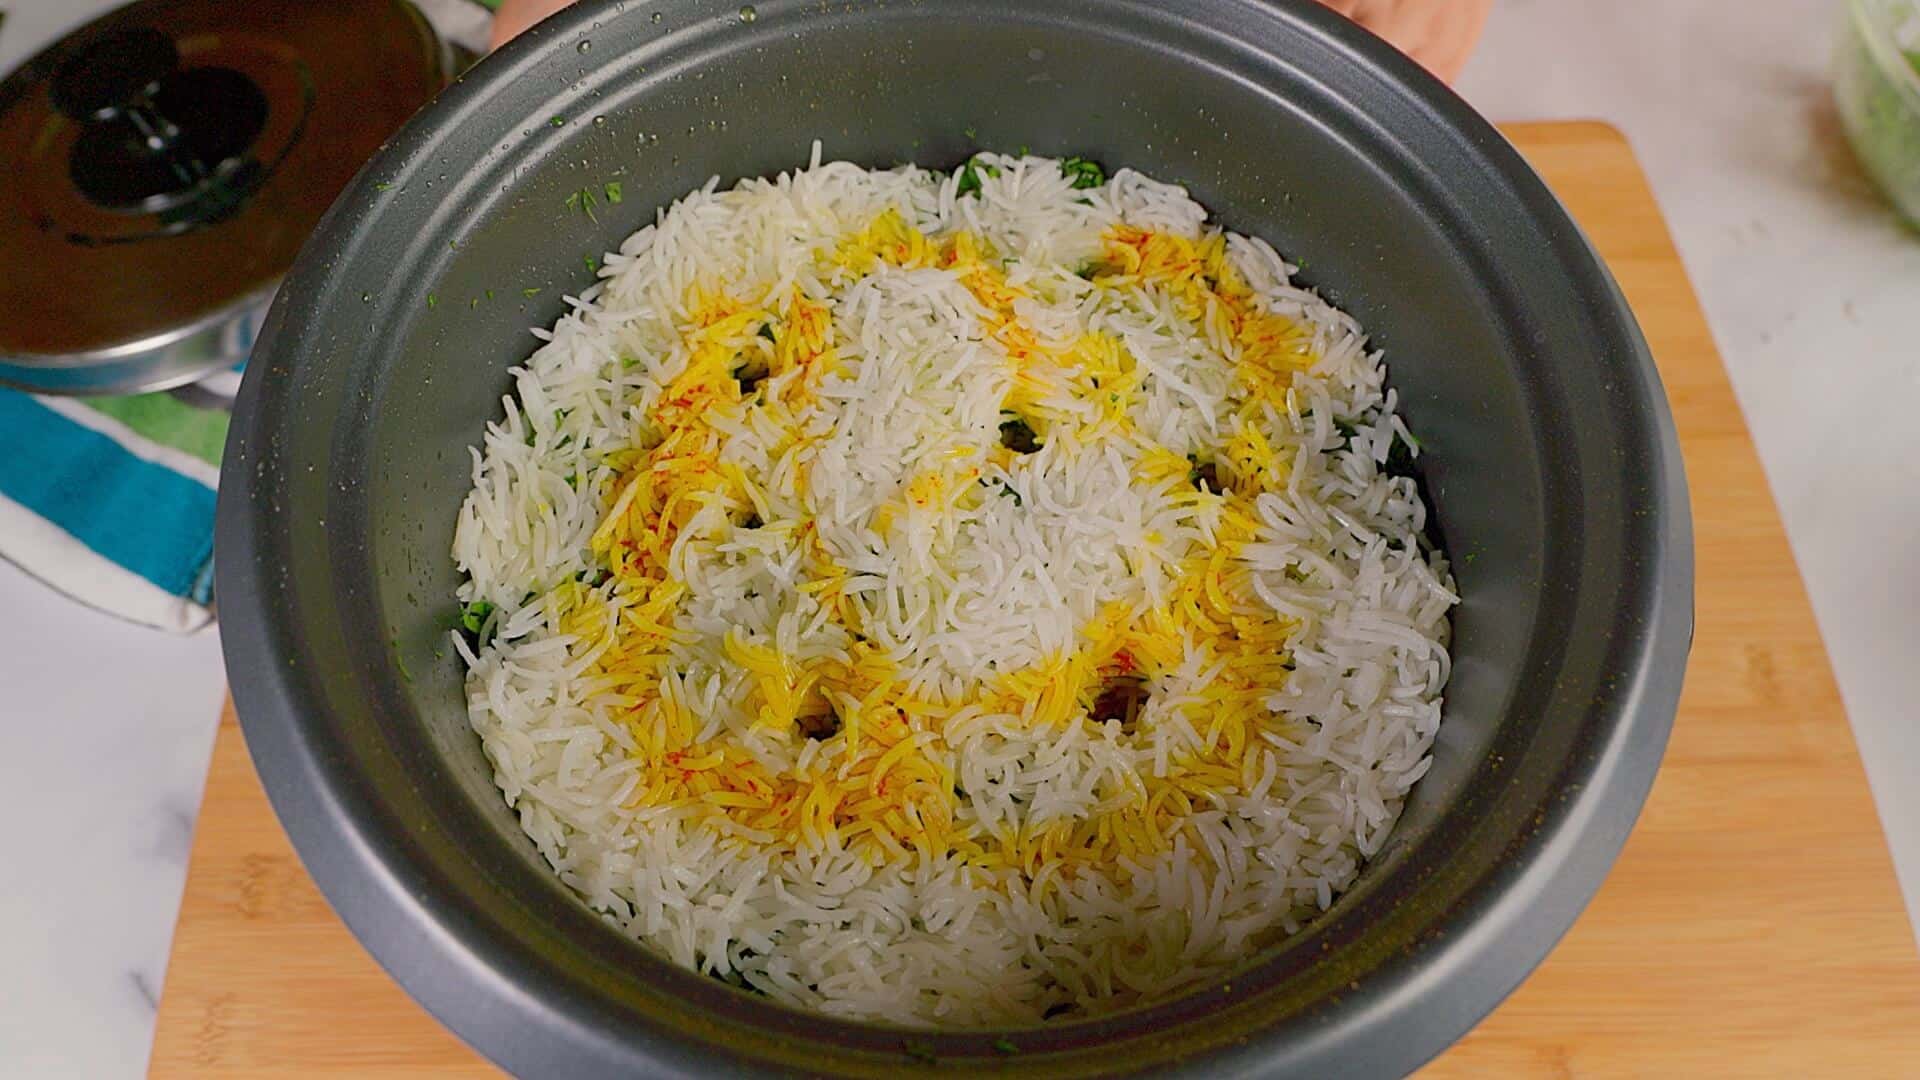 Final layer of rice followed by a sprinkle of saffron water.